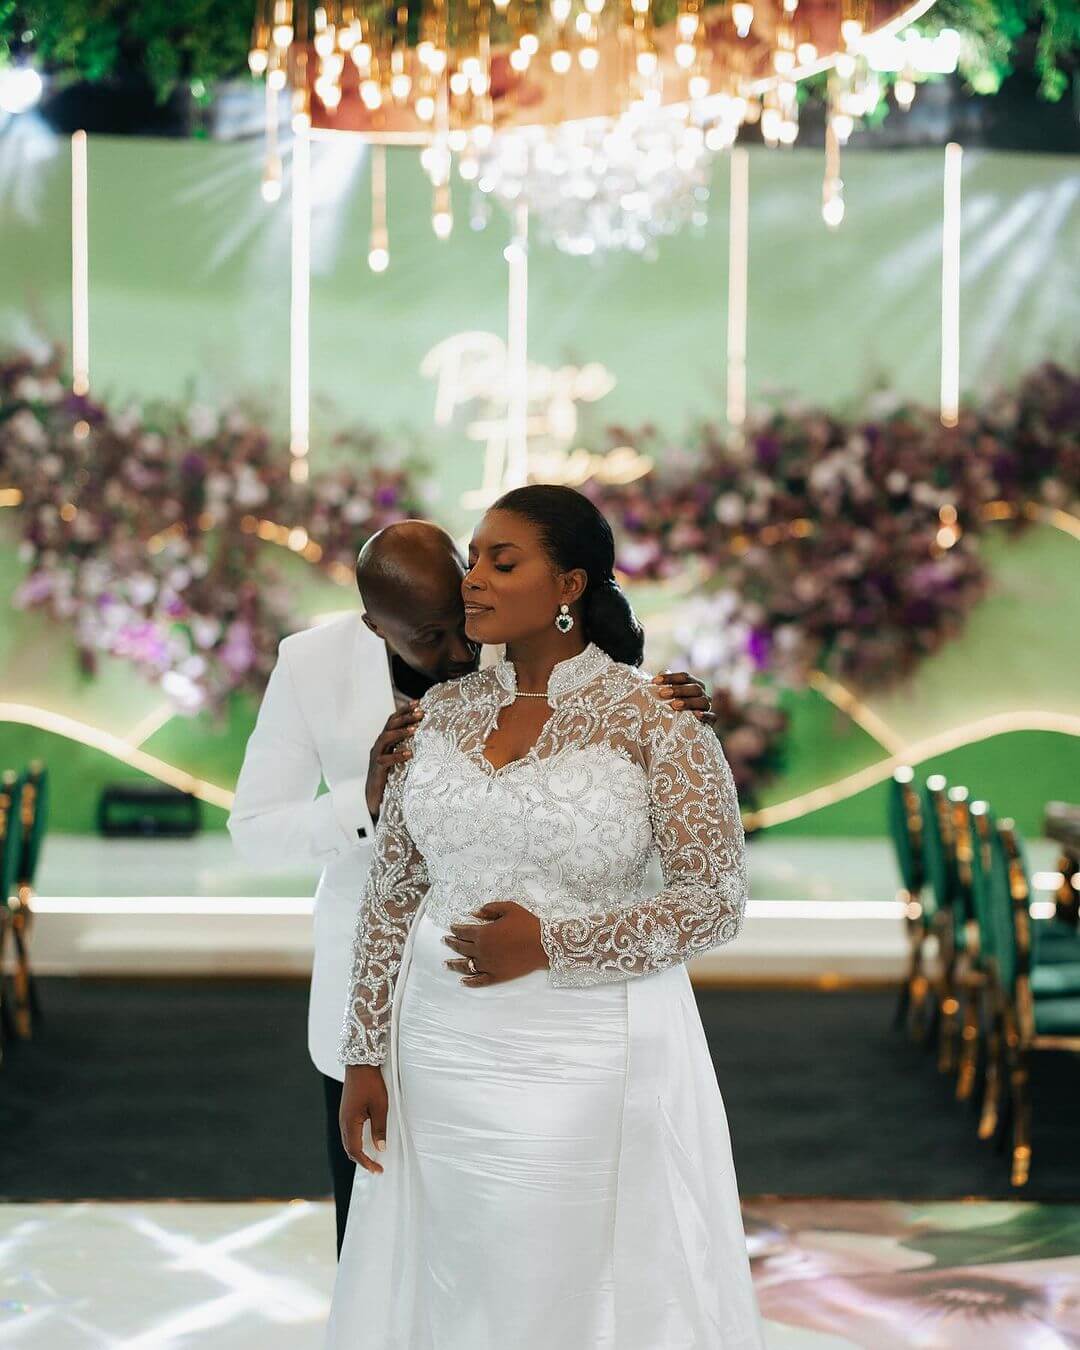 10 things to consider when choosing your Ghana wedding dress